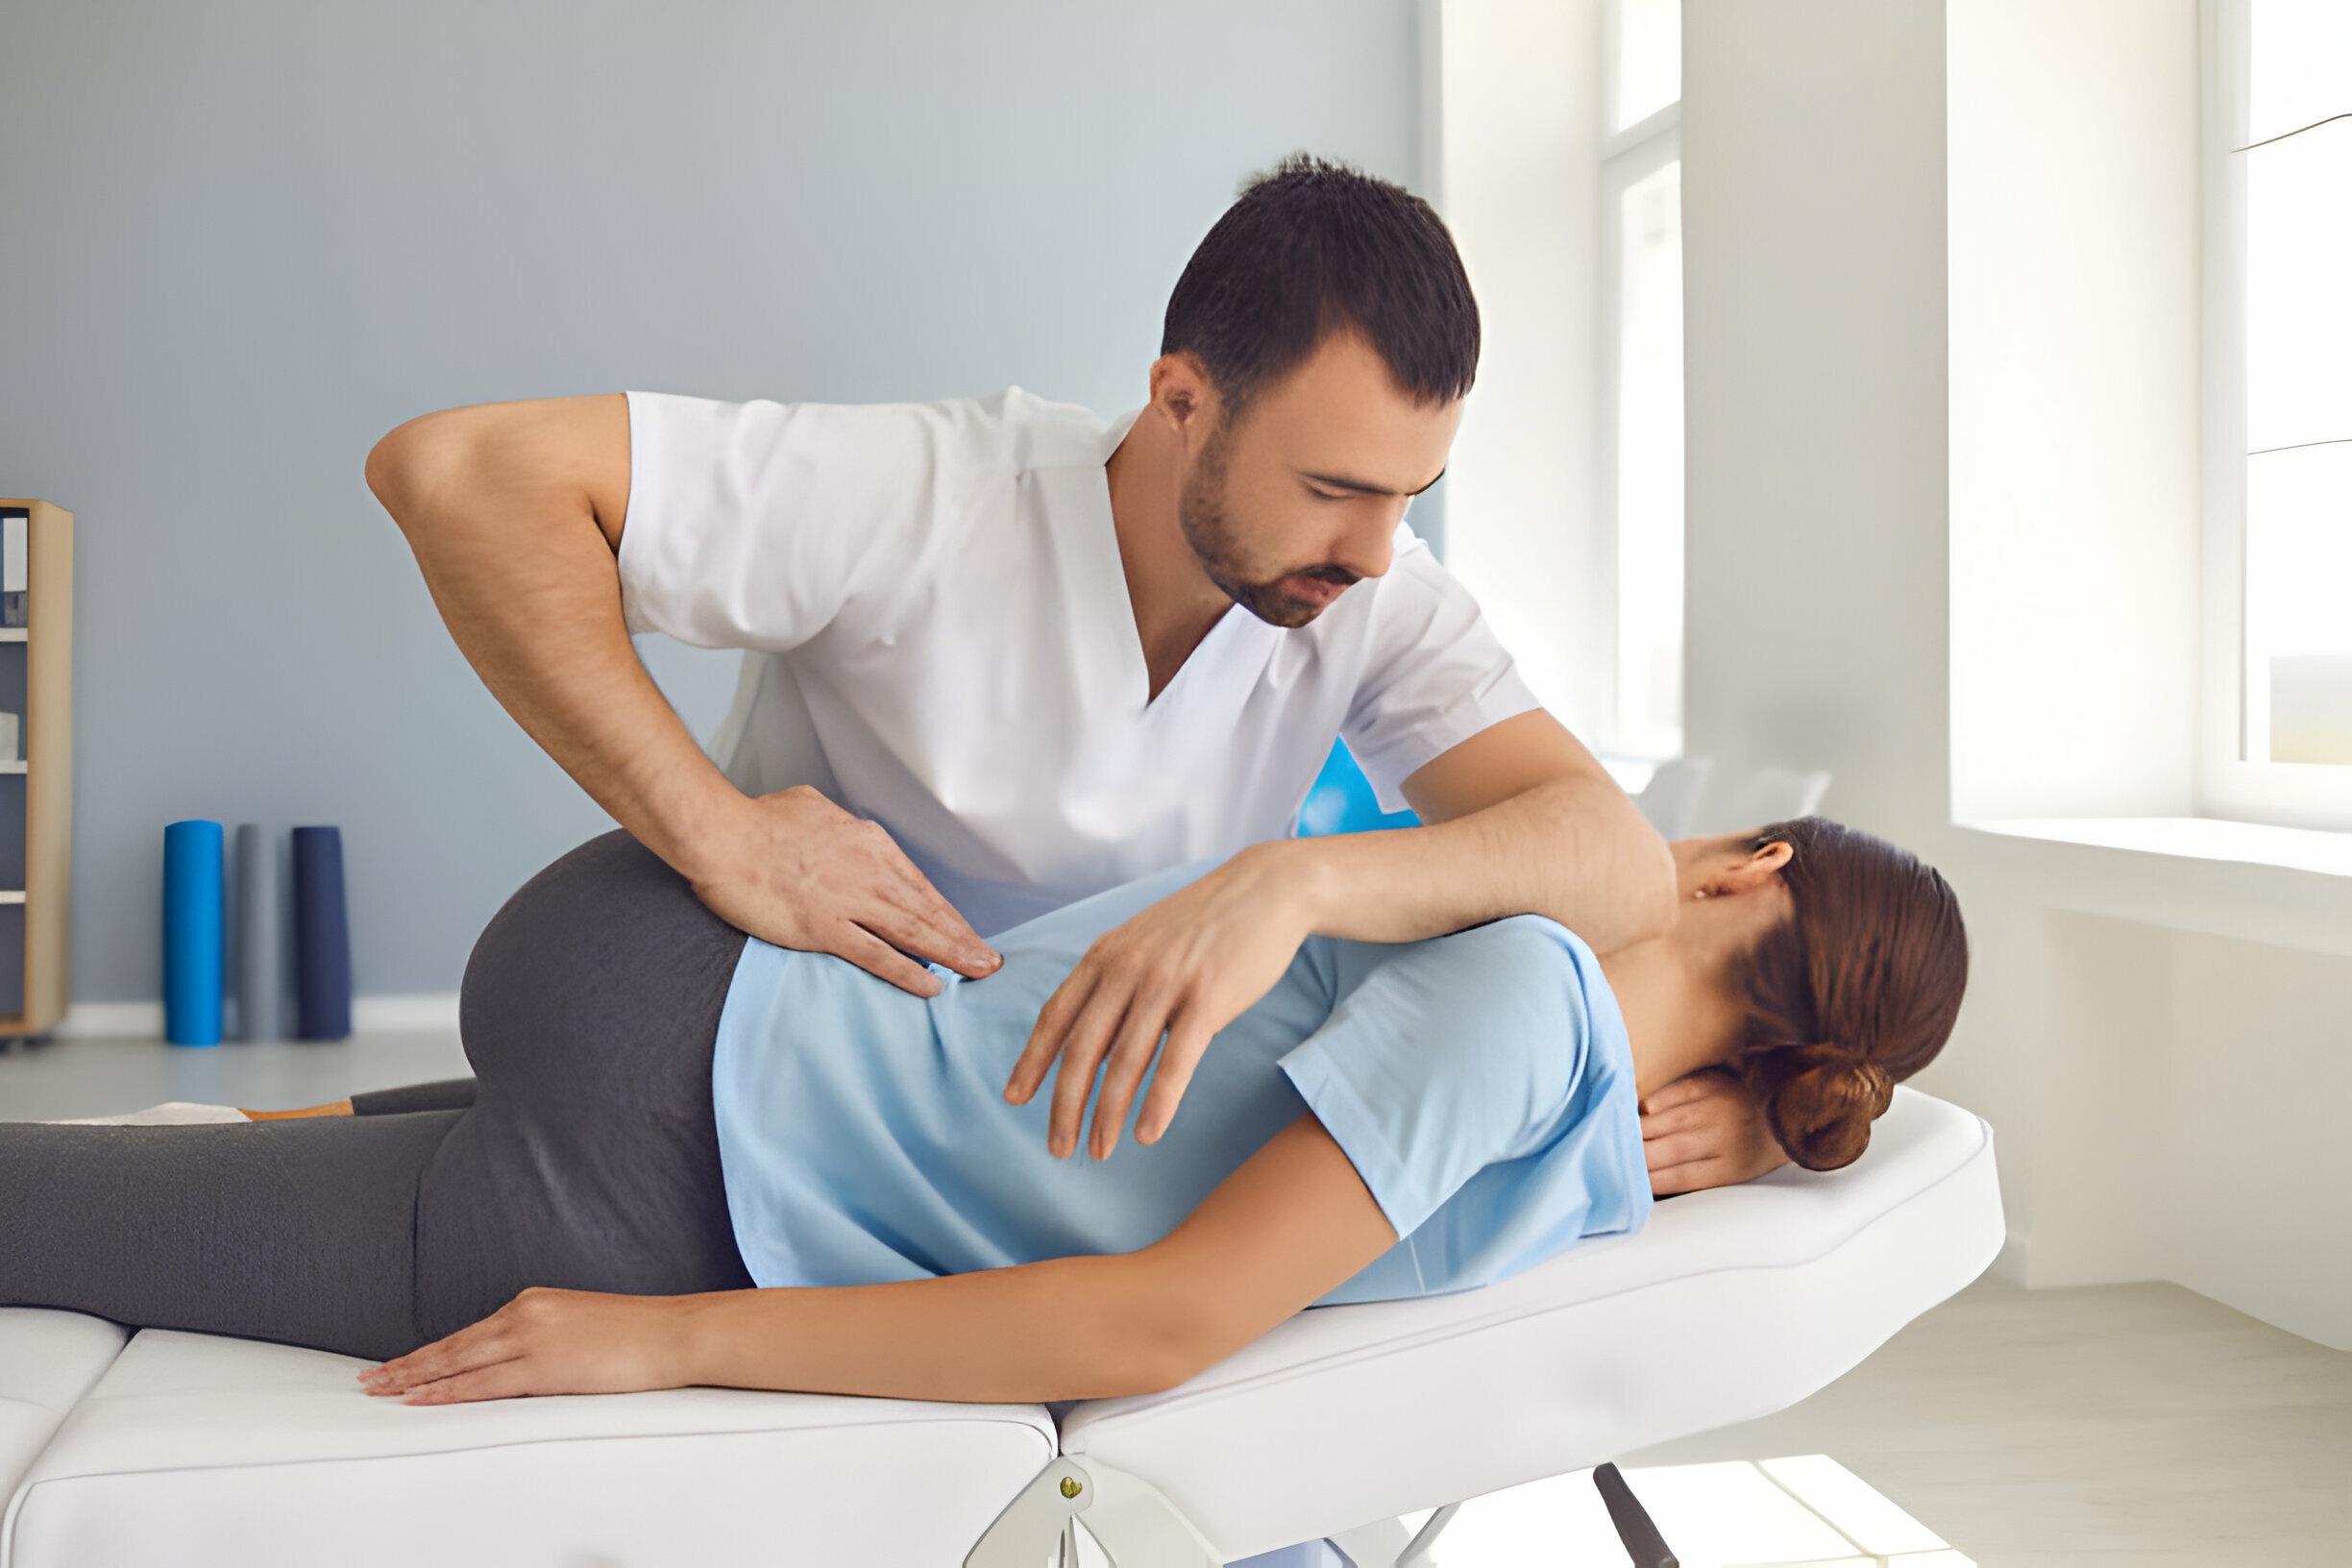 What is difference between chiropractic and physiotherapy?